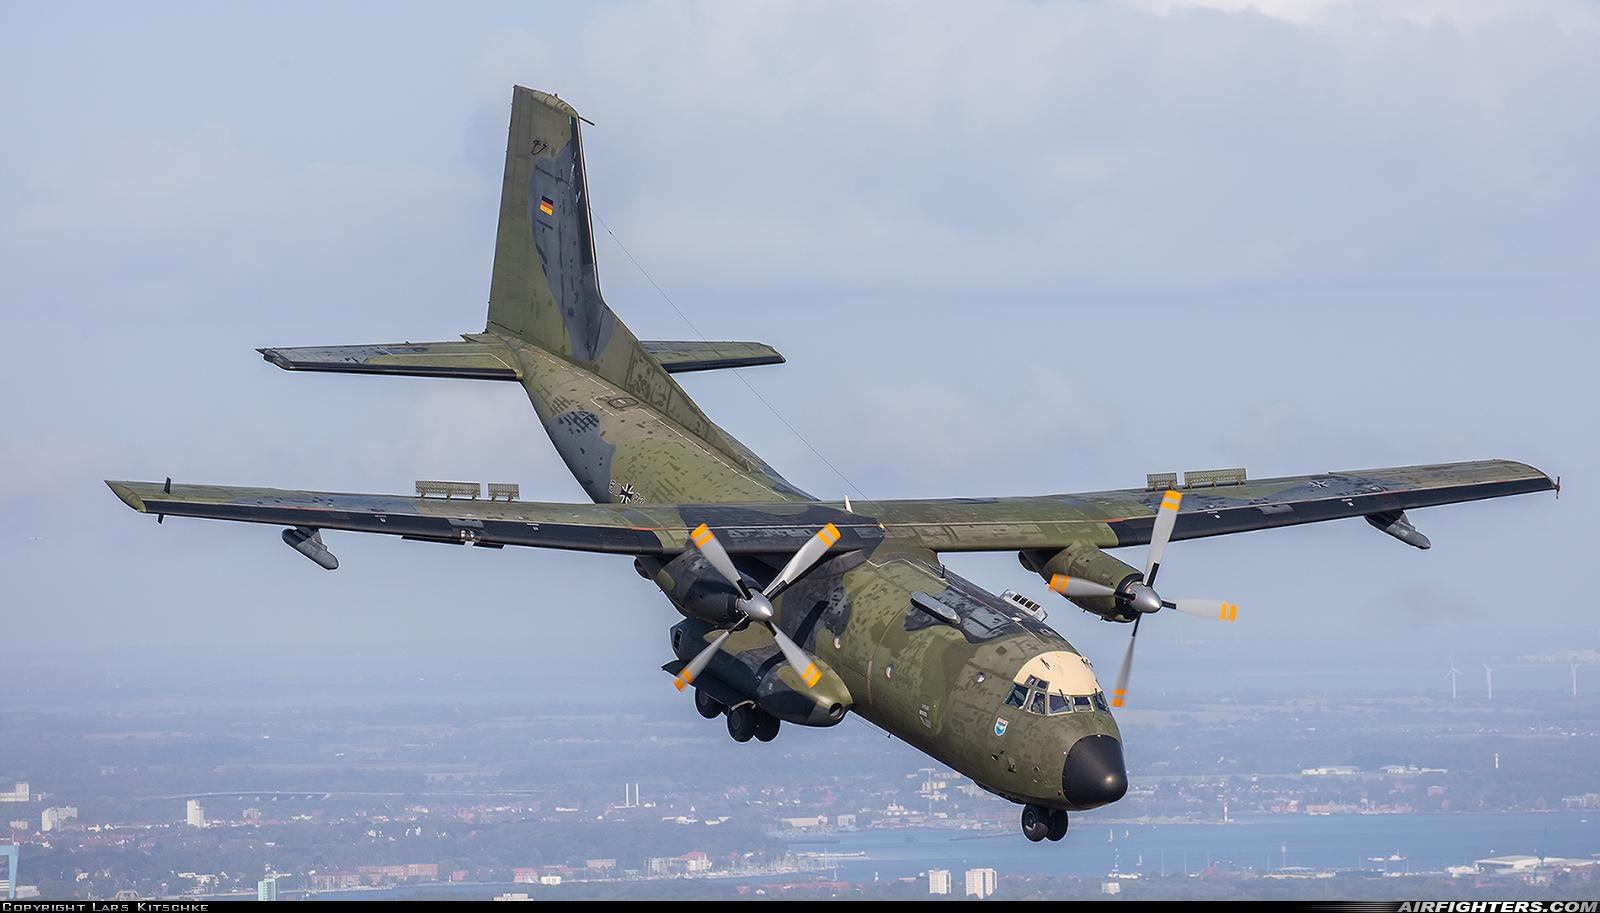 Germany - Air Force Transport Allianz C-160D 50+83 at In Flight, Germany